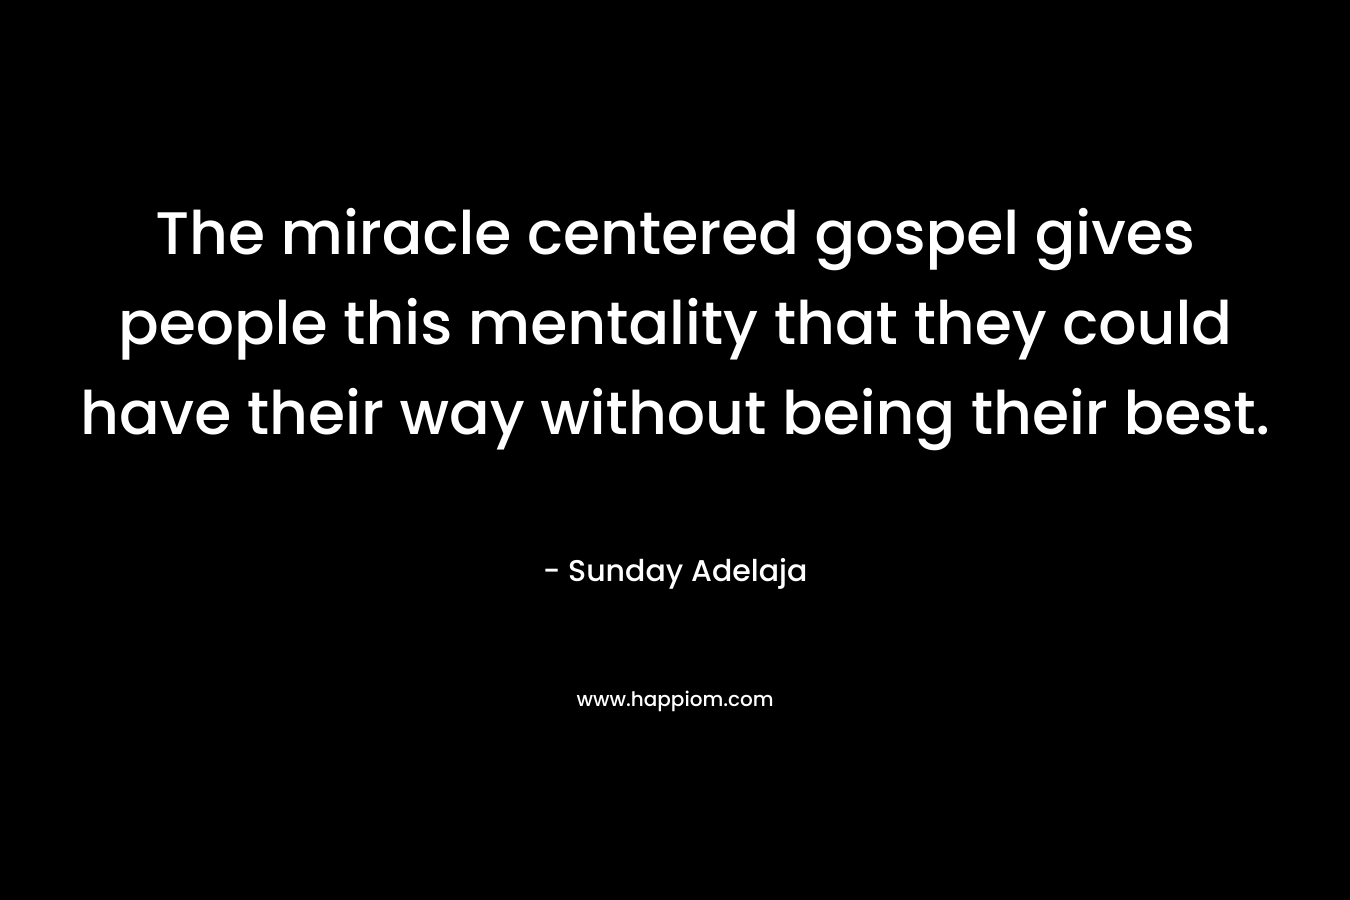 The miracle centered gospel gives people this mentality that they could have their way without being their best. – Sunday Adelaja